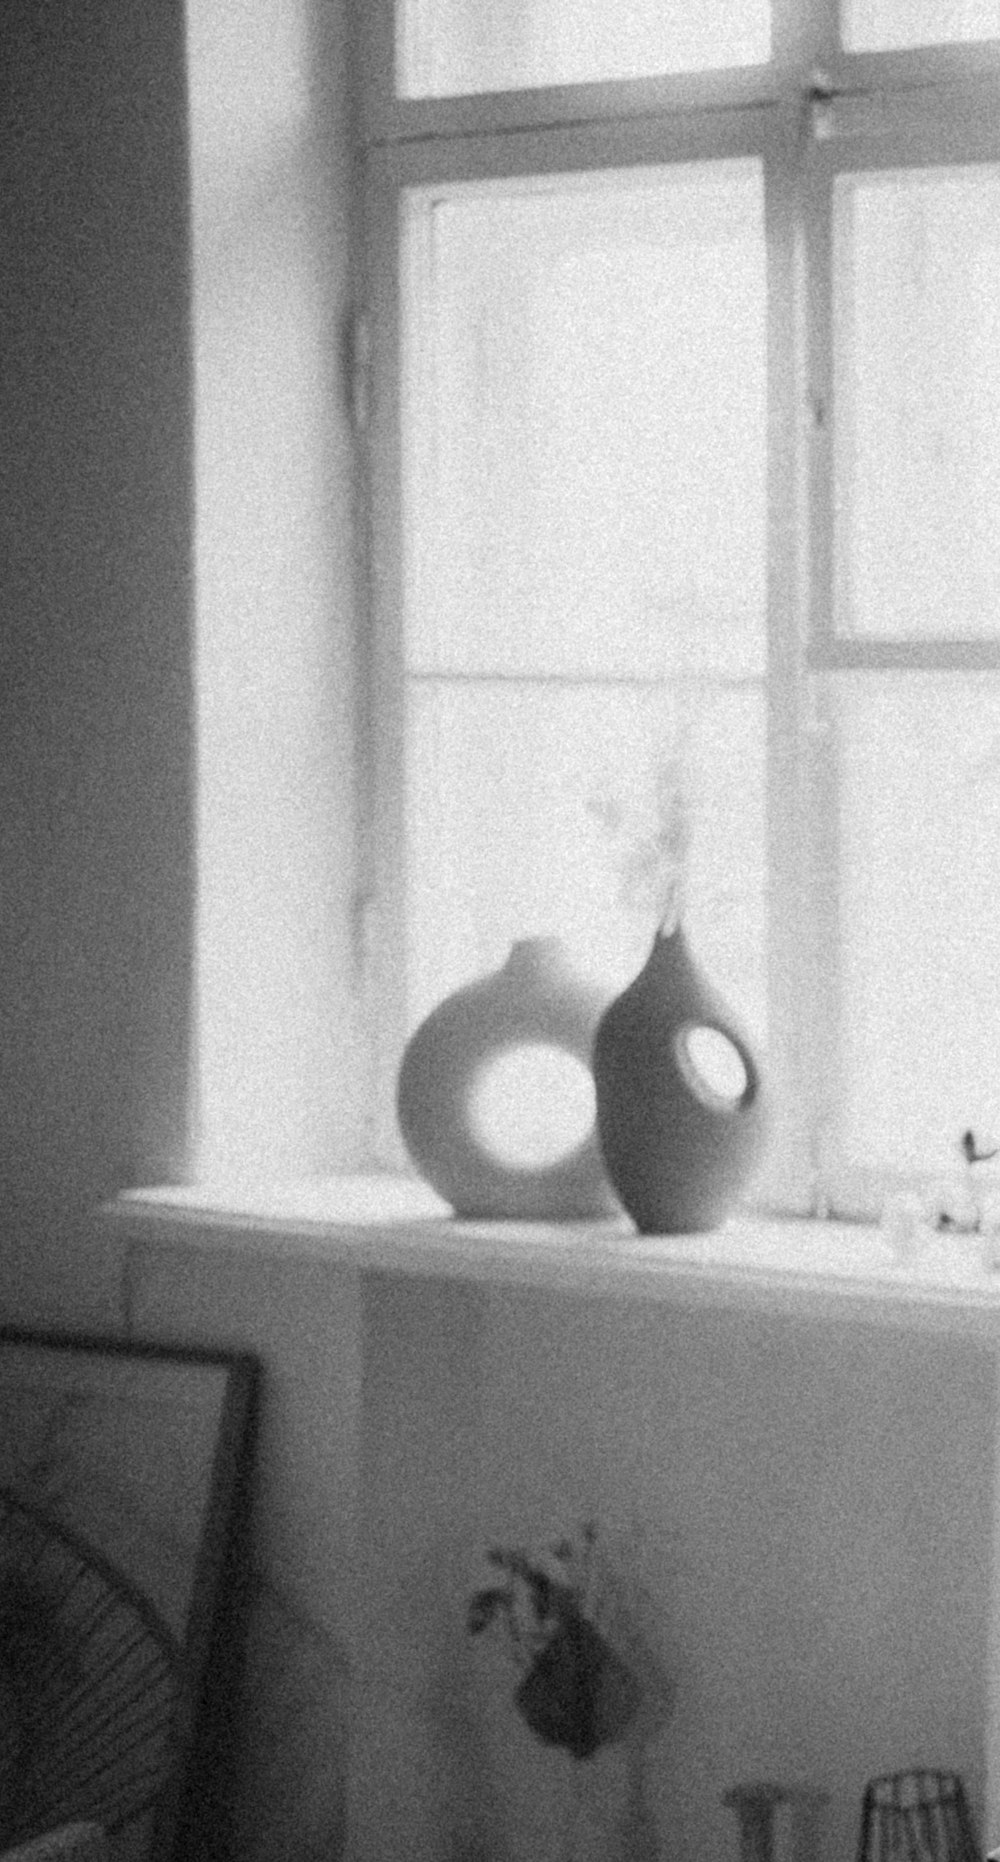 a black and white photo of a vase on a window sill